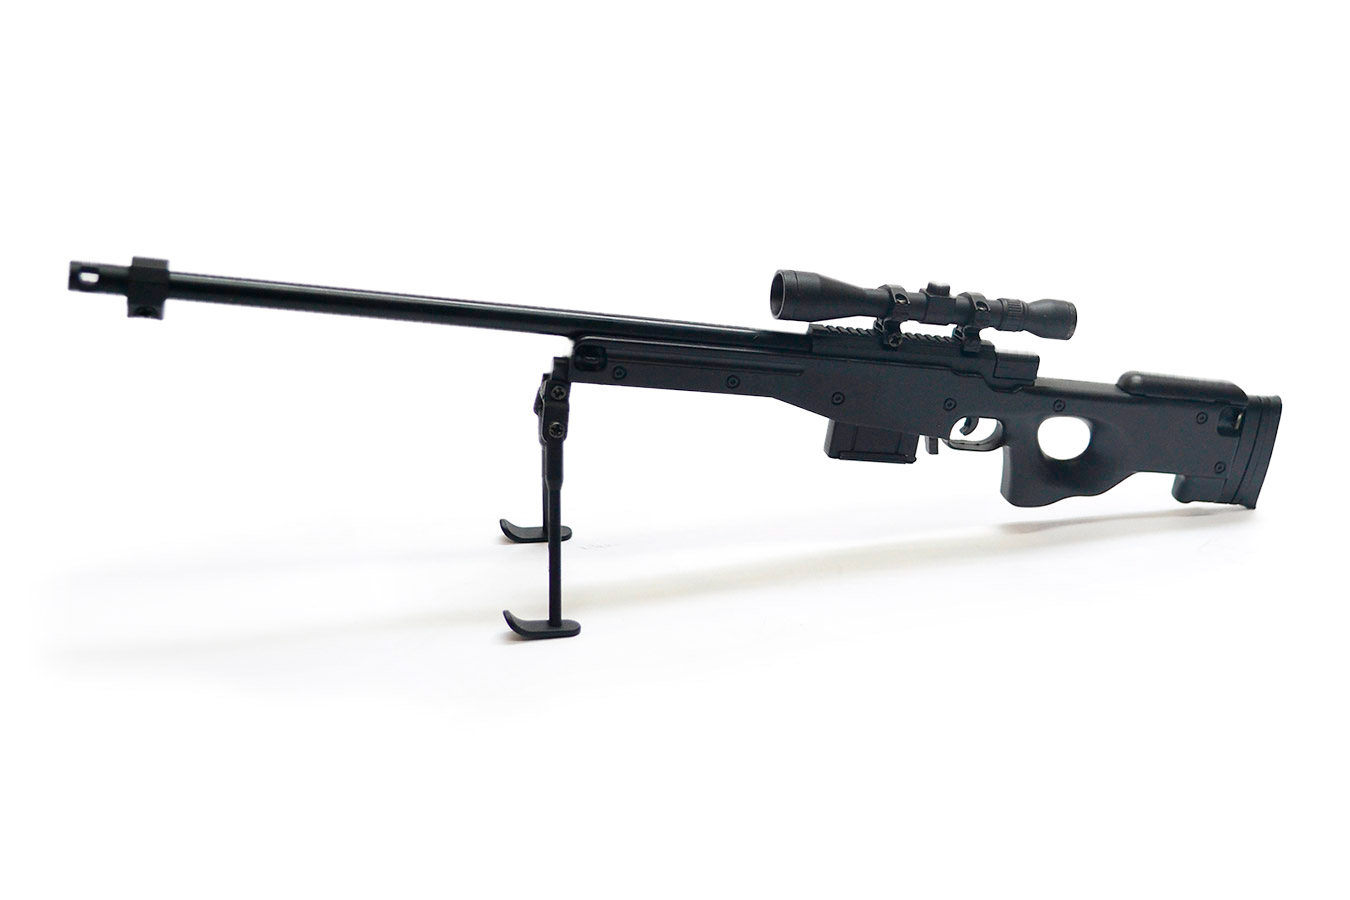 Model sniper rifle Accuracy International L96A1 (AWP) on a scale of 1: 4, Black